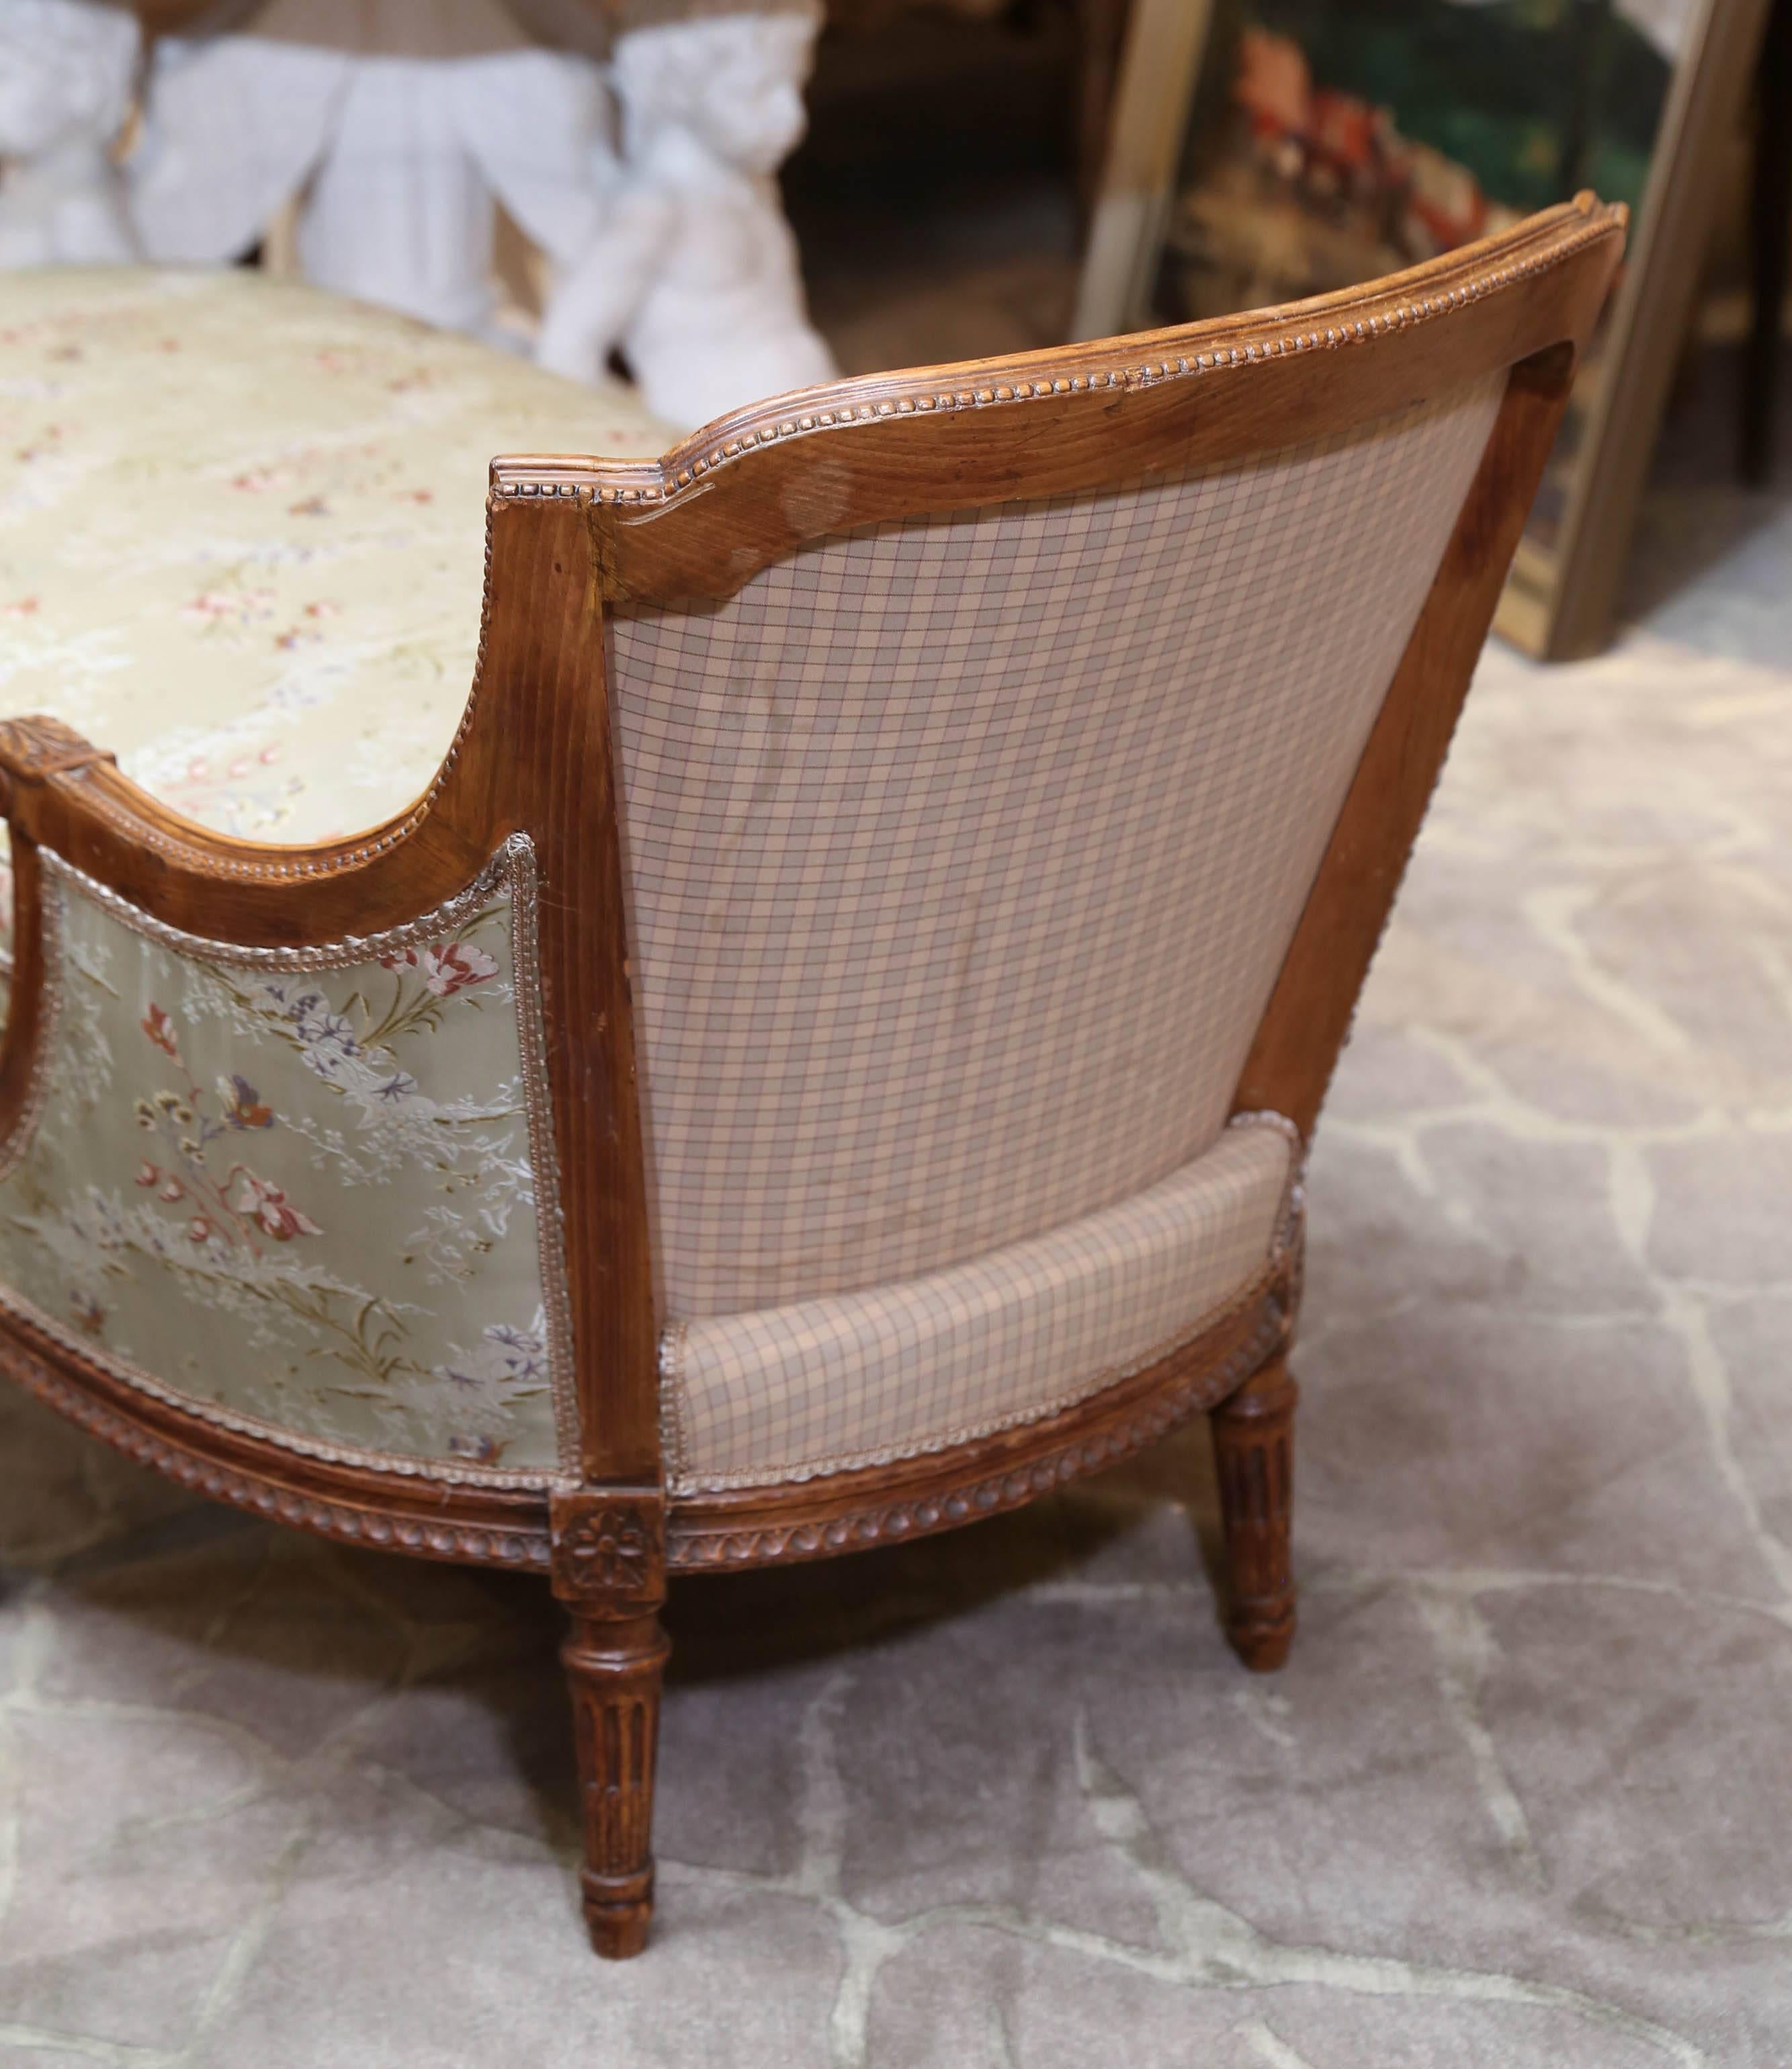 Contemporary Louis XVI Style Chaise Longue with Silk Upholstery